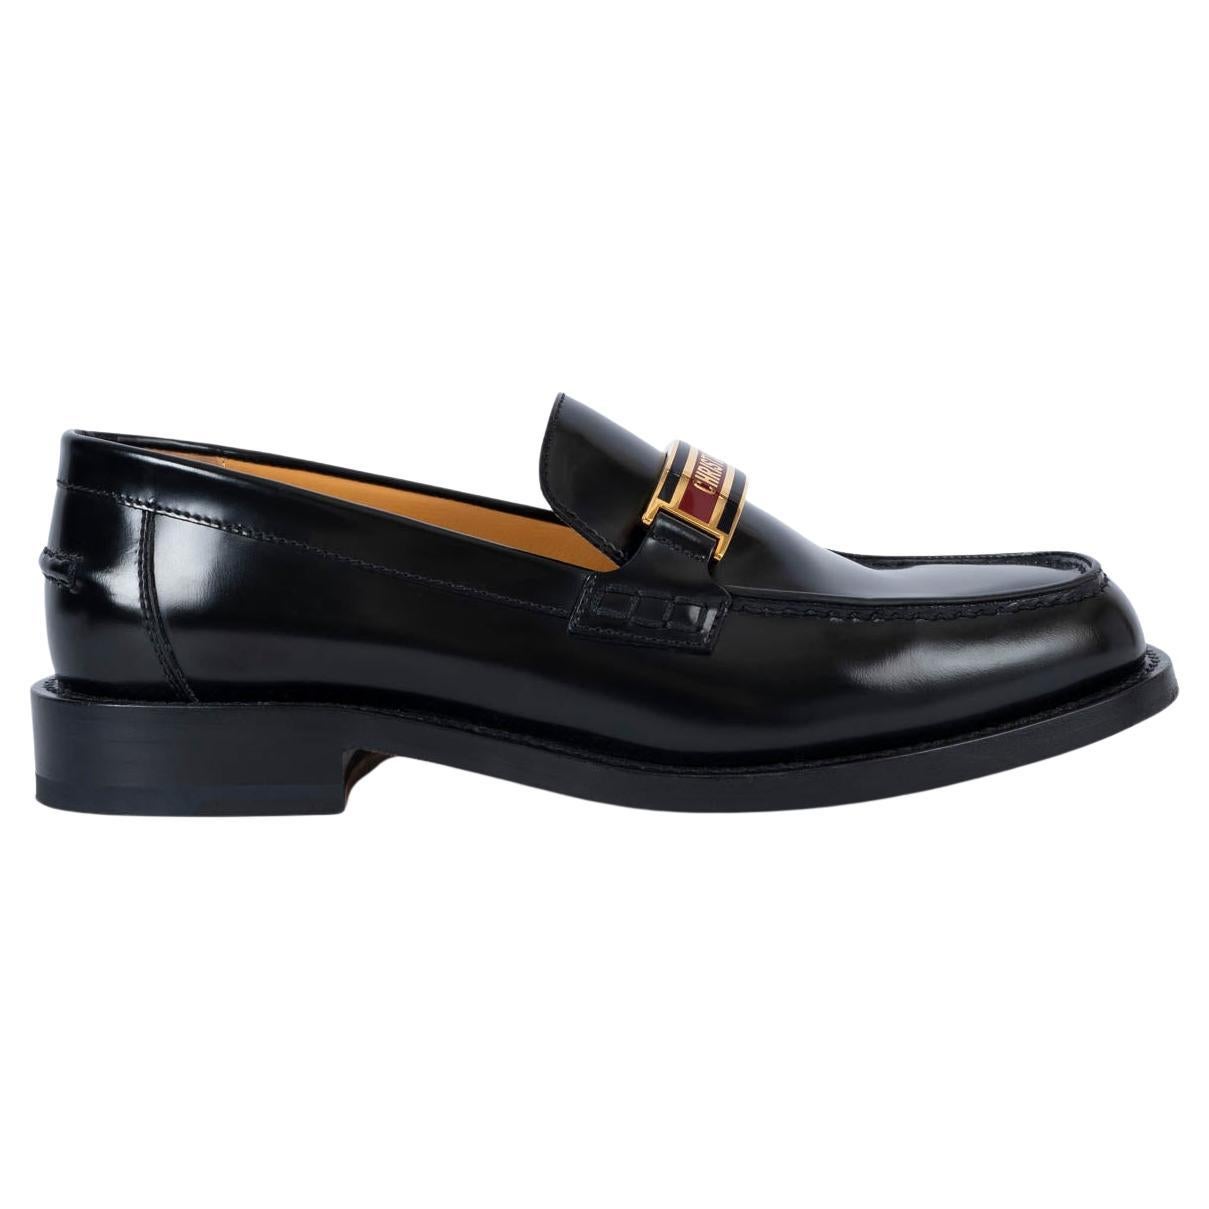 CHRISTIAN DIOR black brushed leather CODE Loafers Shoes 38 fit 38.5